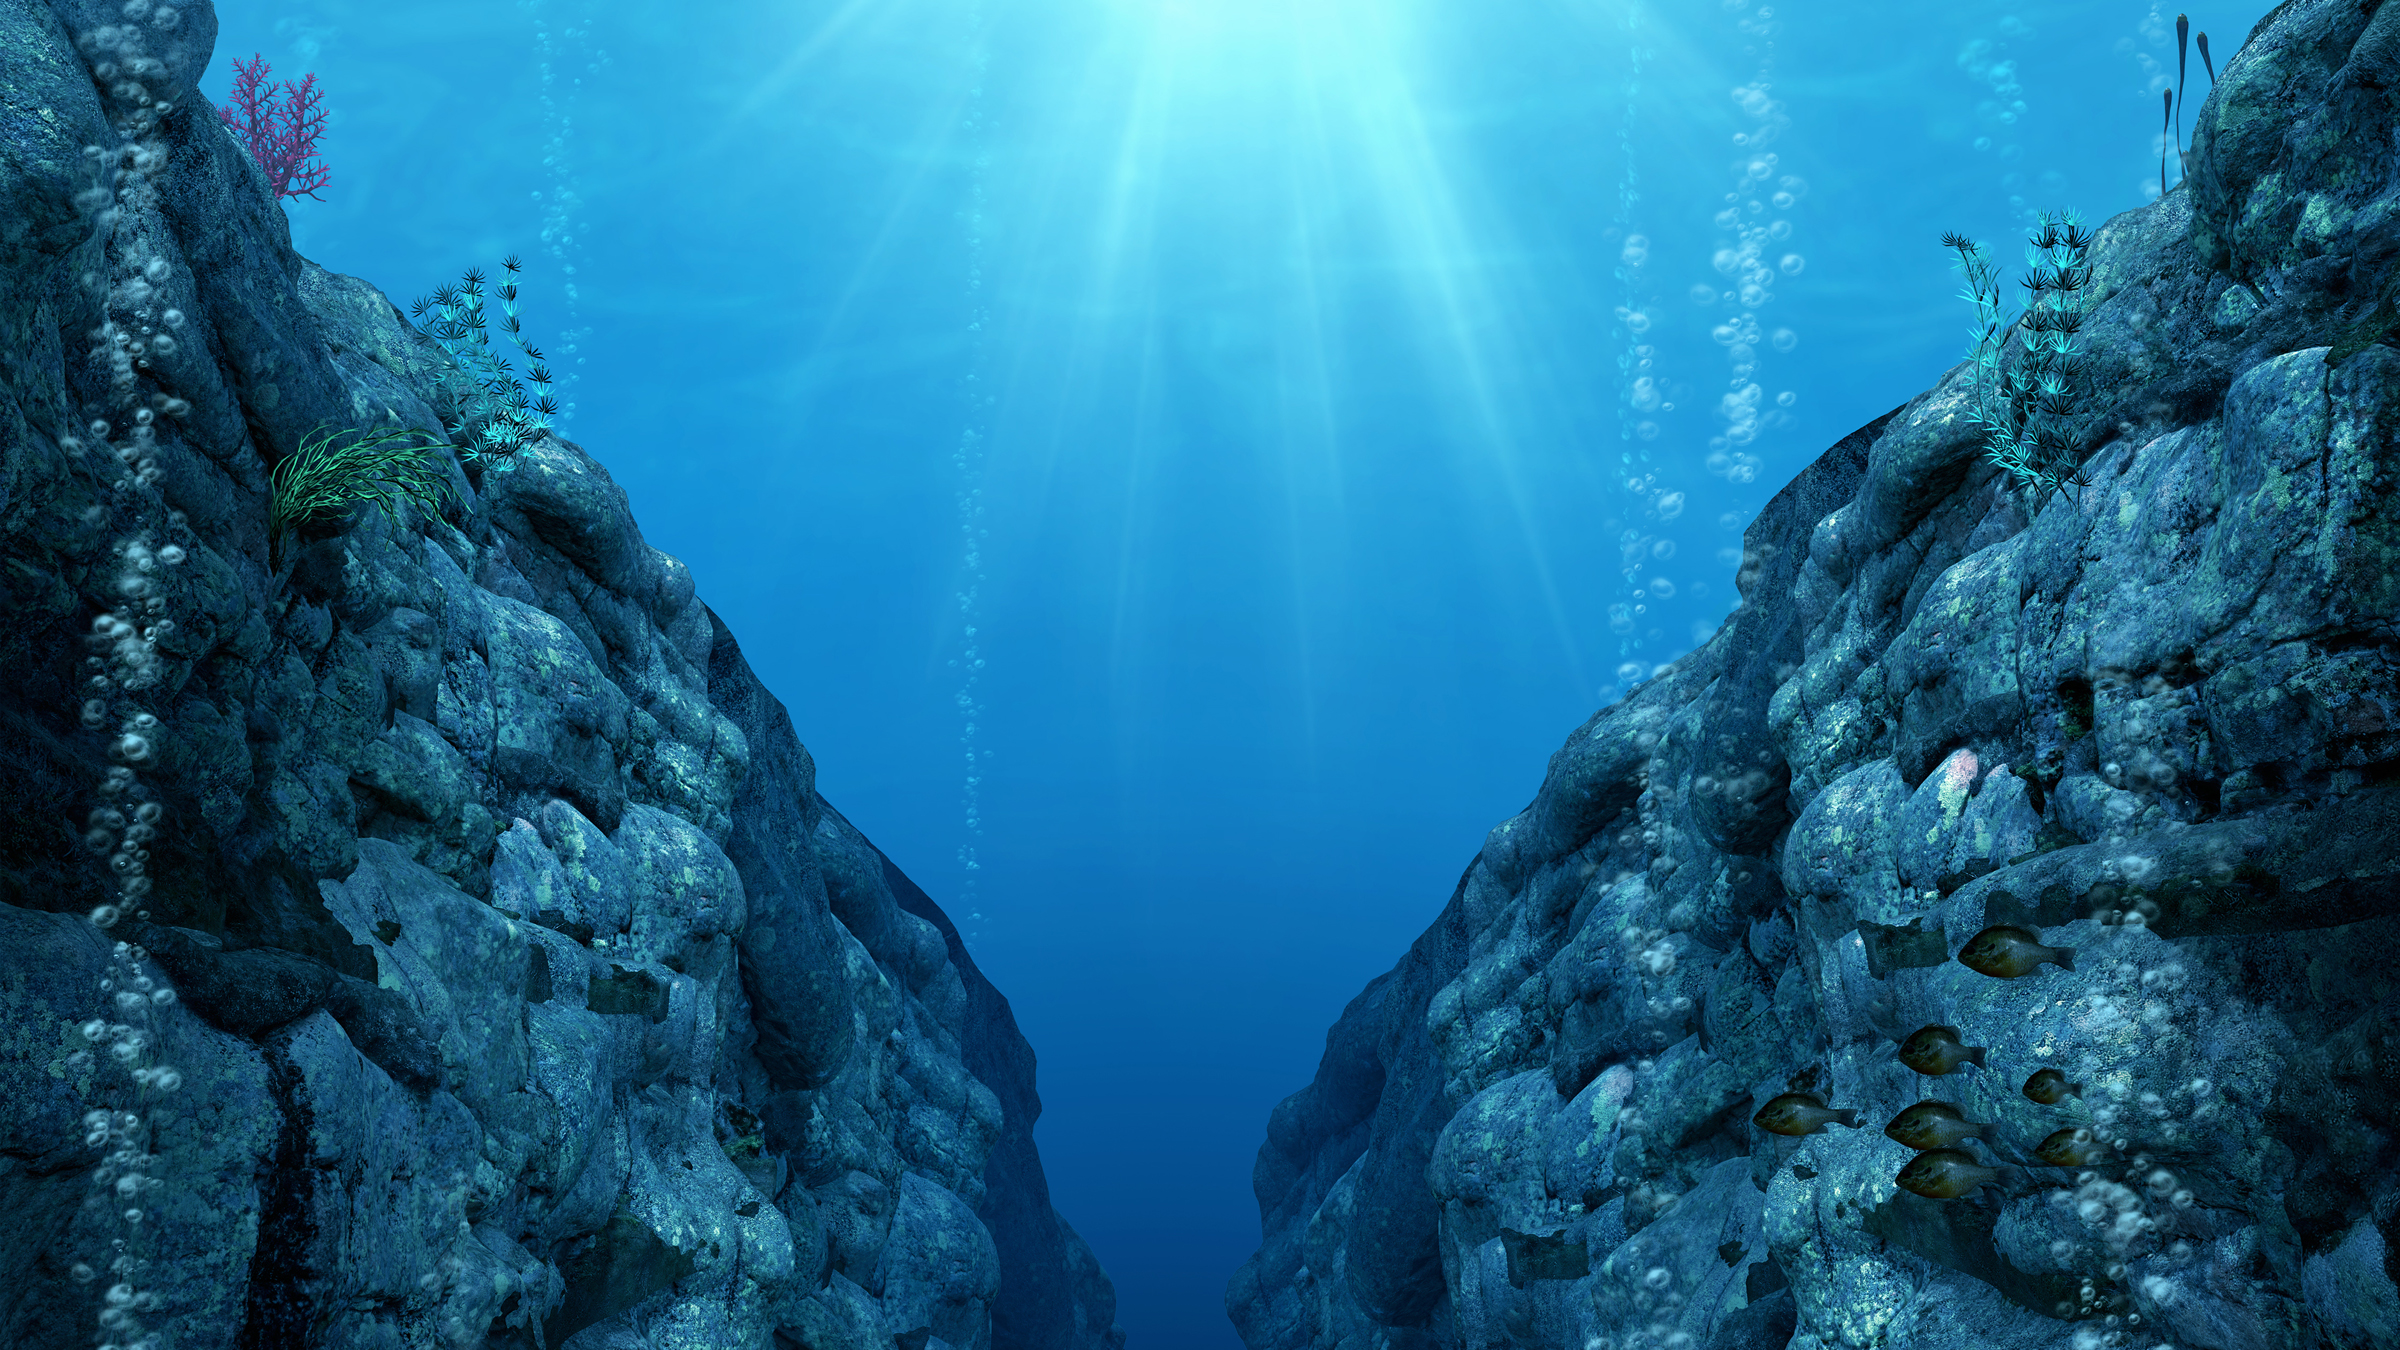 What are the deepest spots in Earth's oceans?